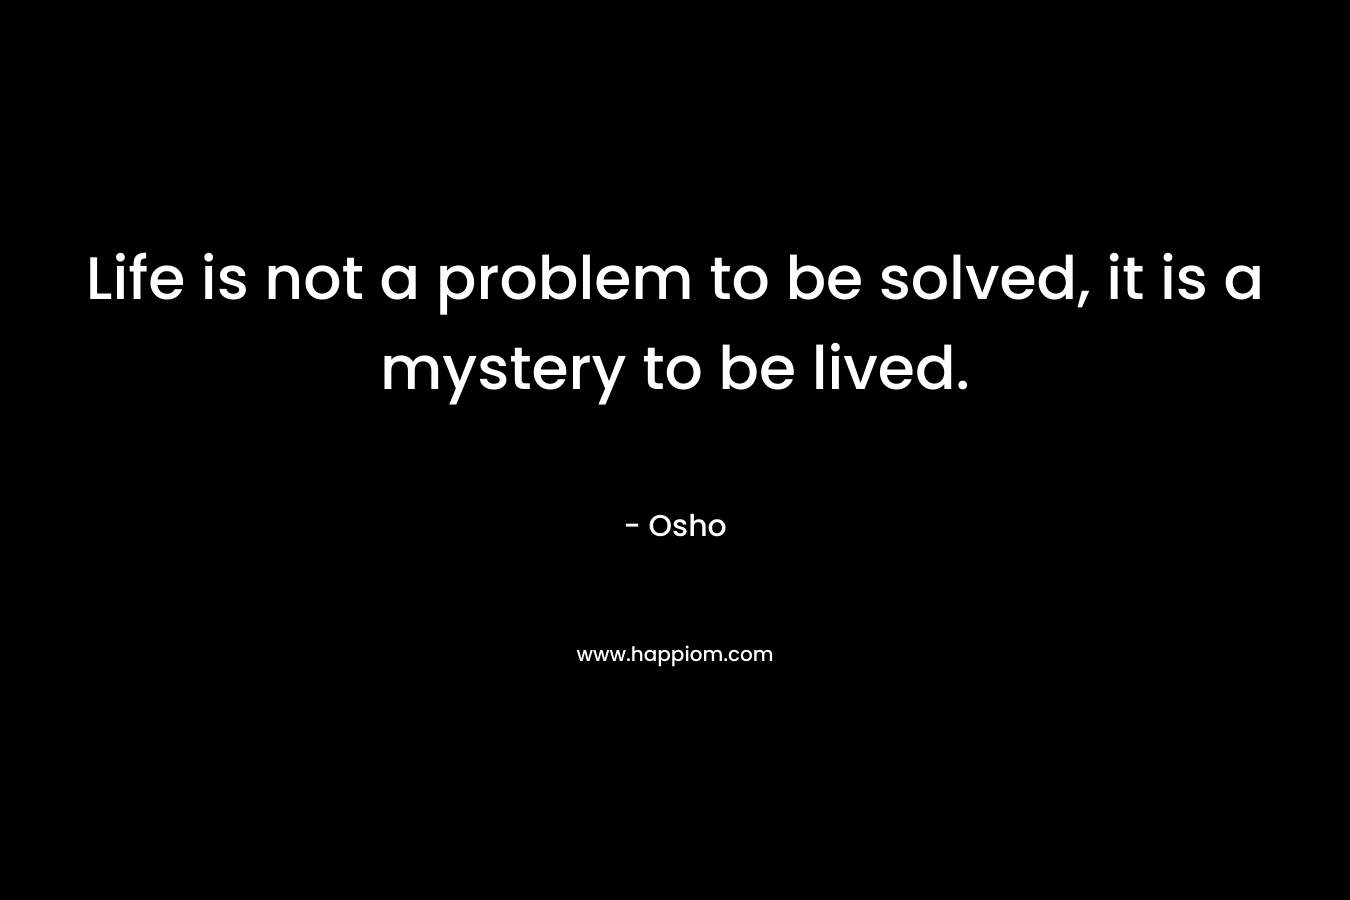 Life is not a problem to be solved, it is a mystery to be lived.